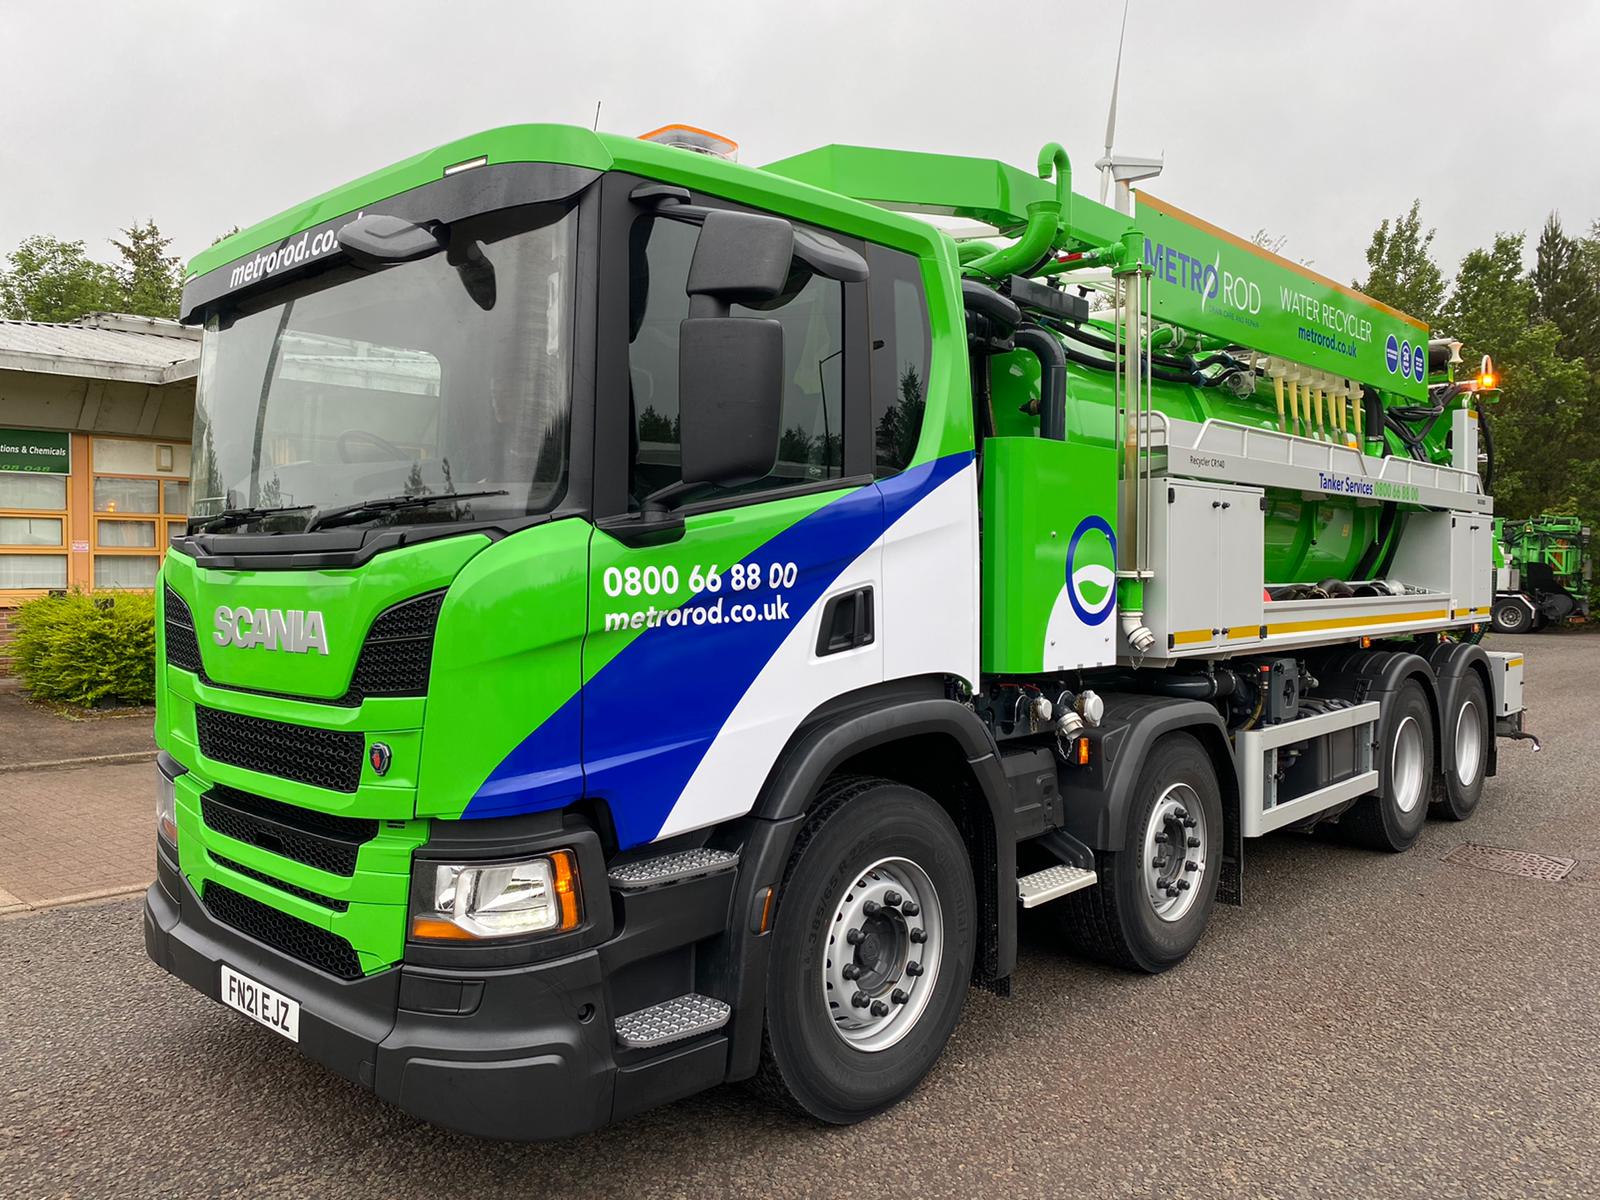 Our Tankers: Bucher CR140 Recycler